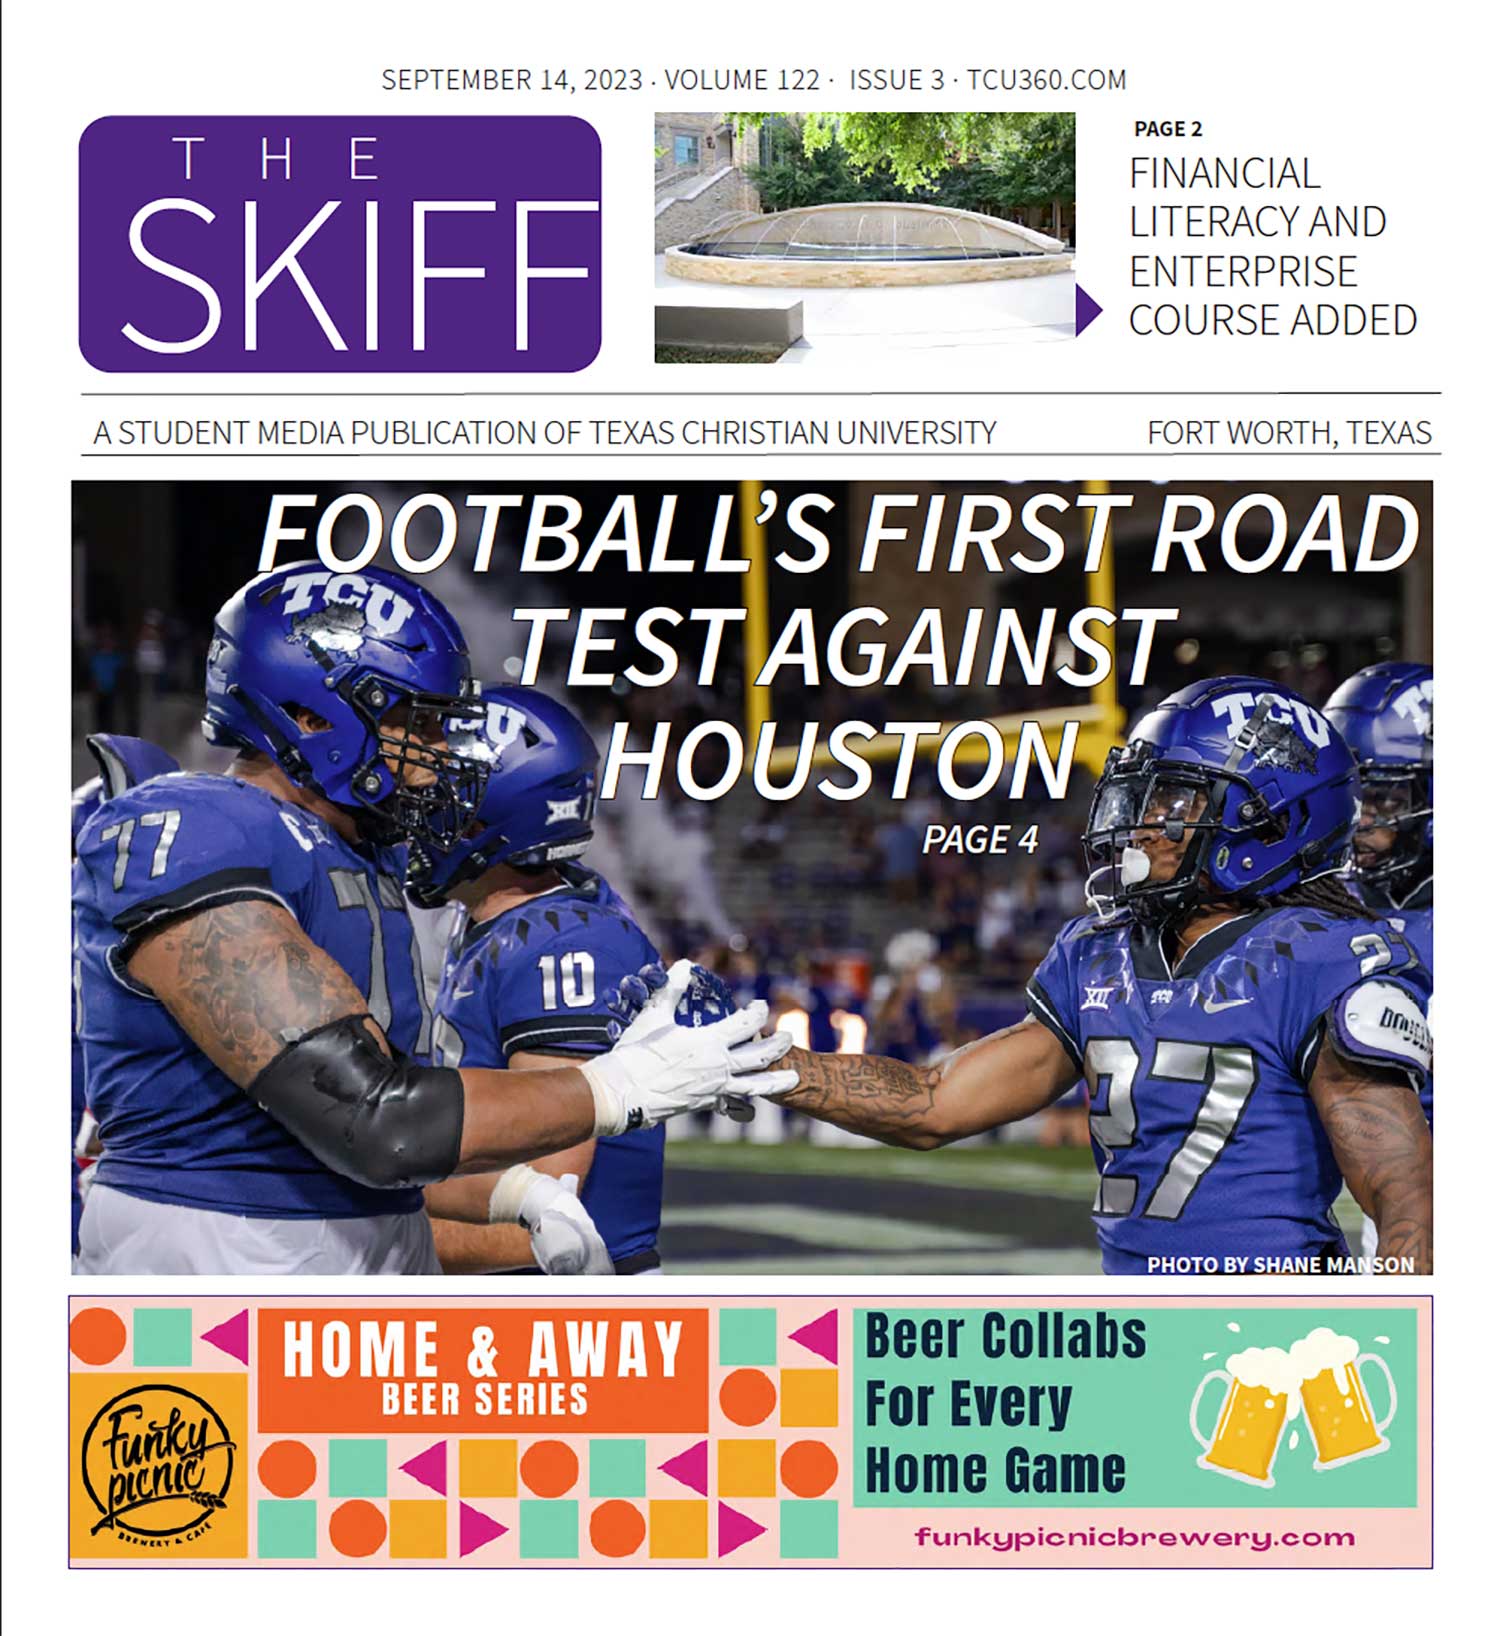 The Skiff cover for Sept. 14, 2023. Volume 122, Issue 3.